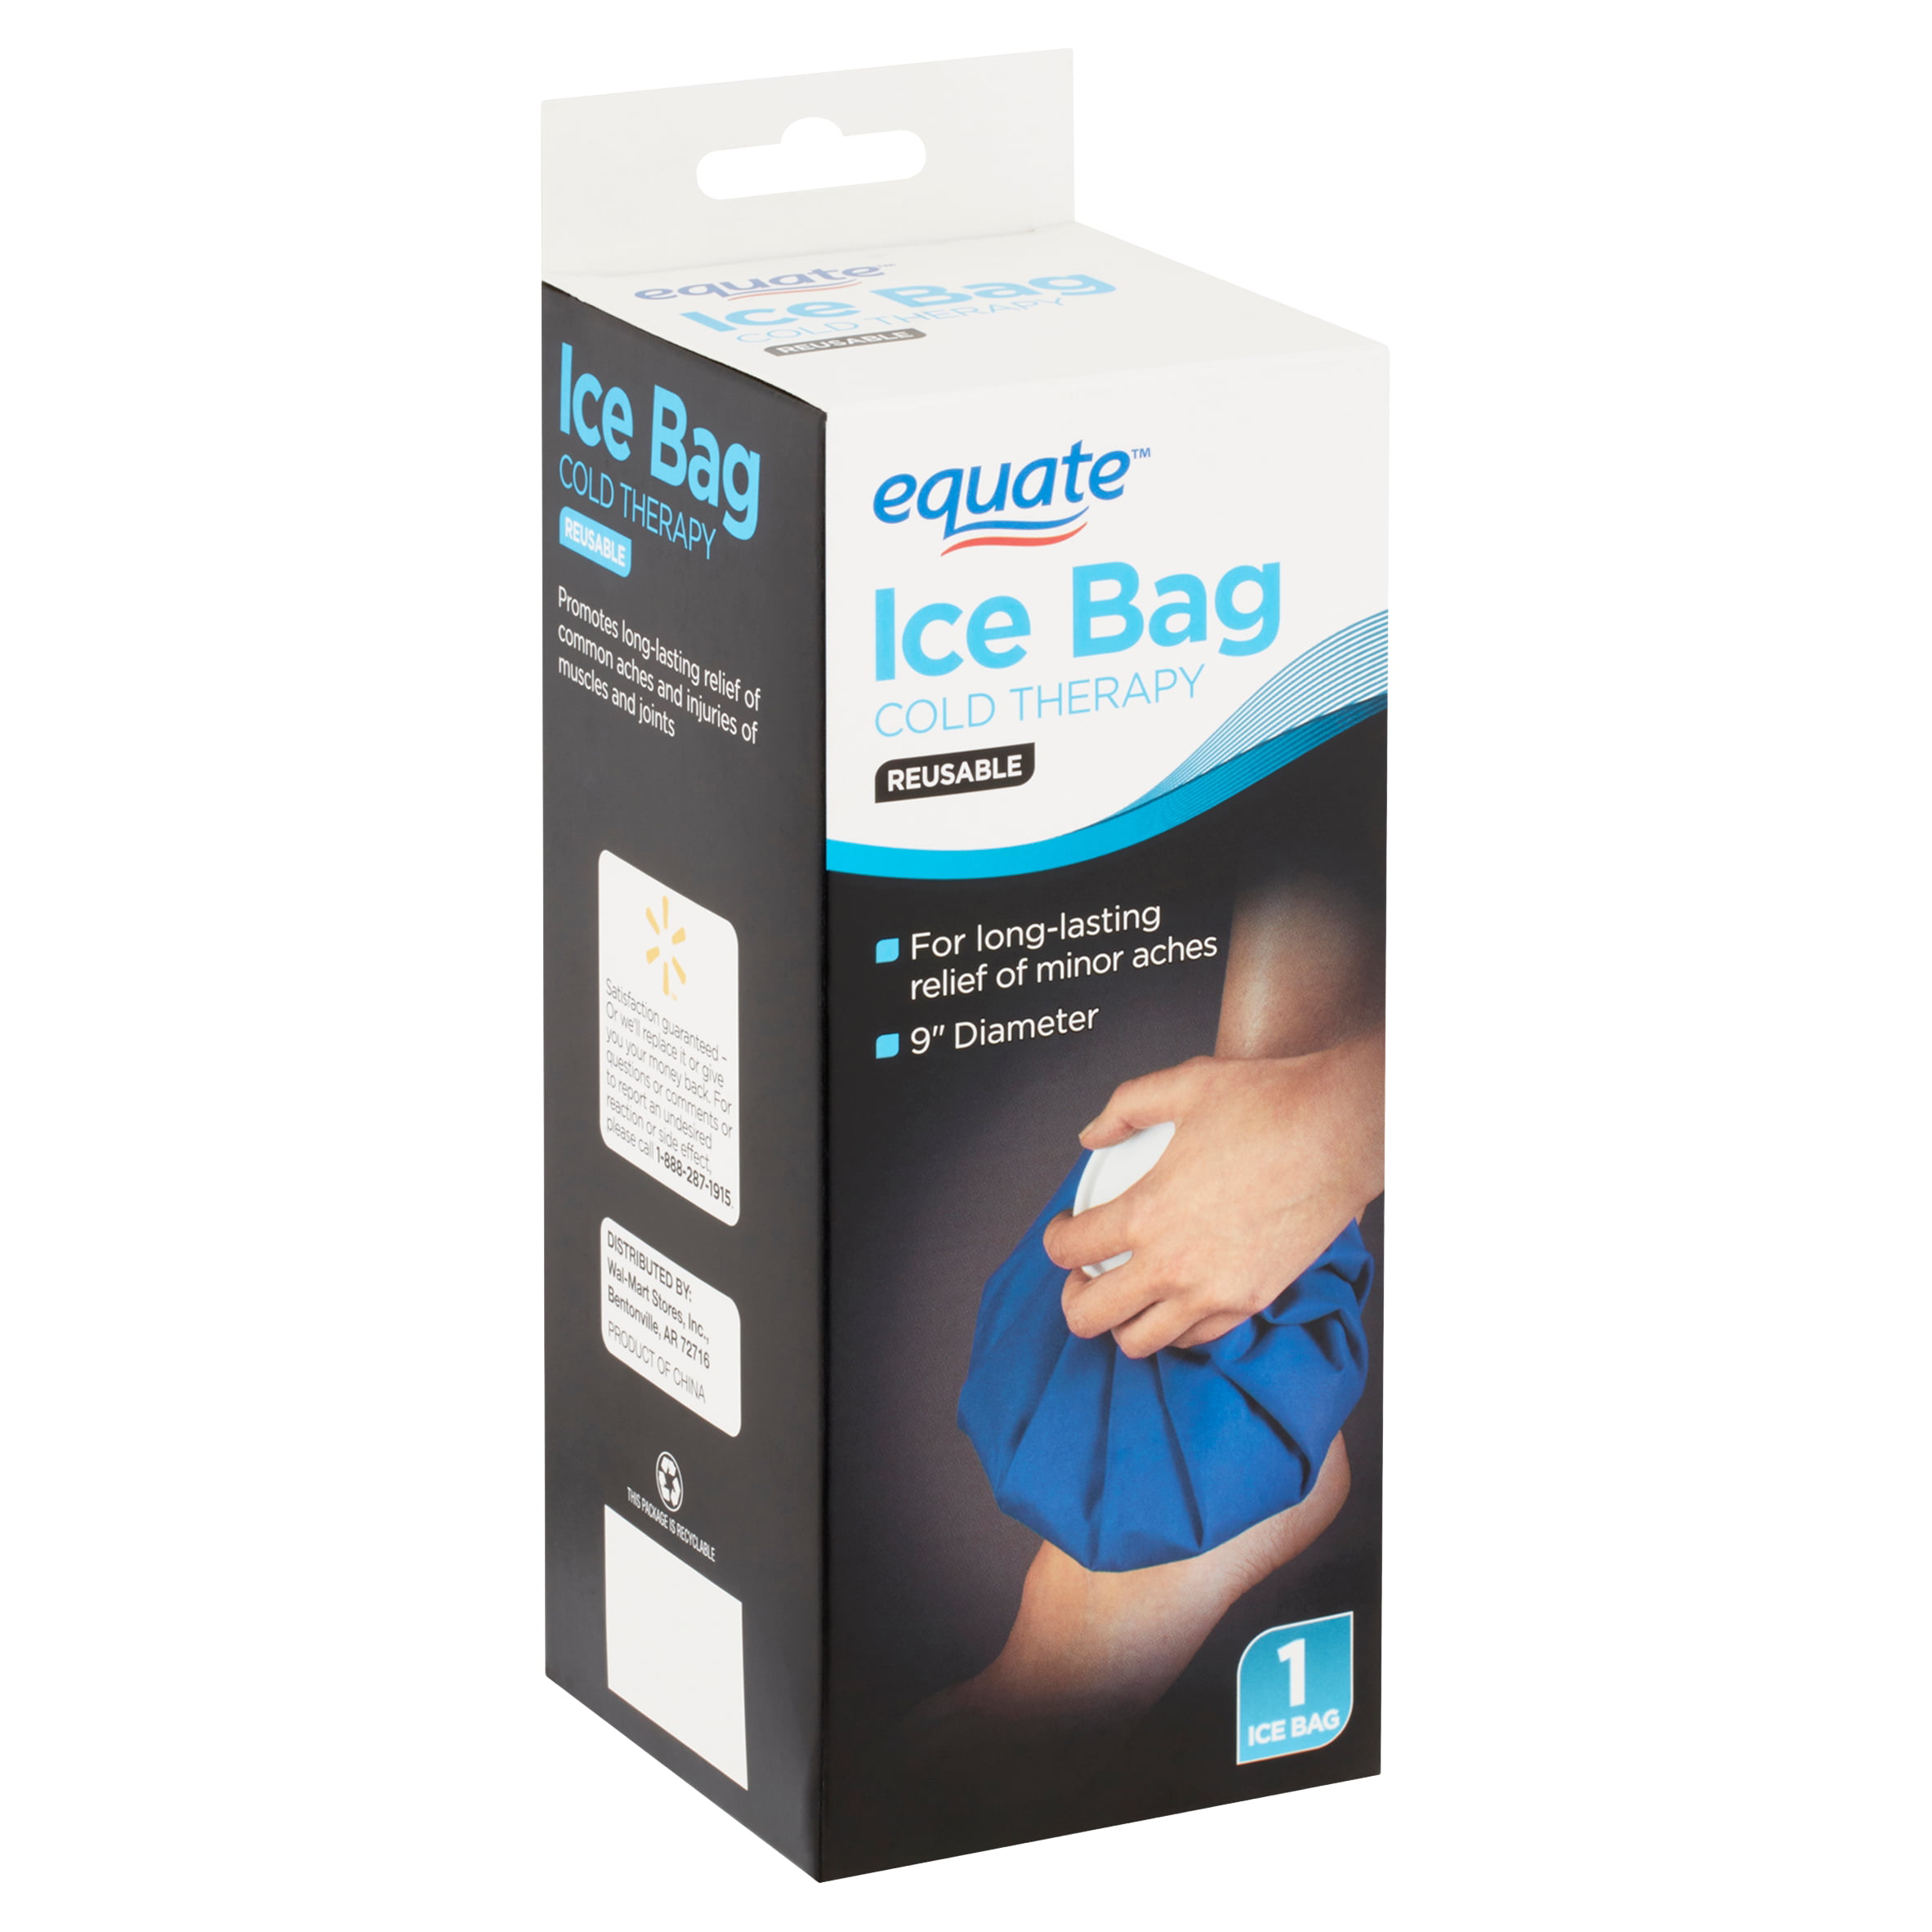 ice bag cold therapy